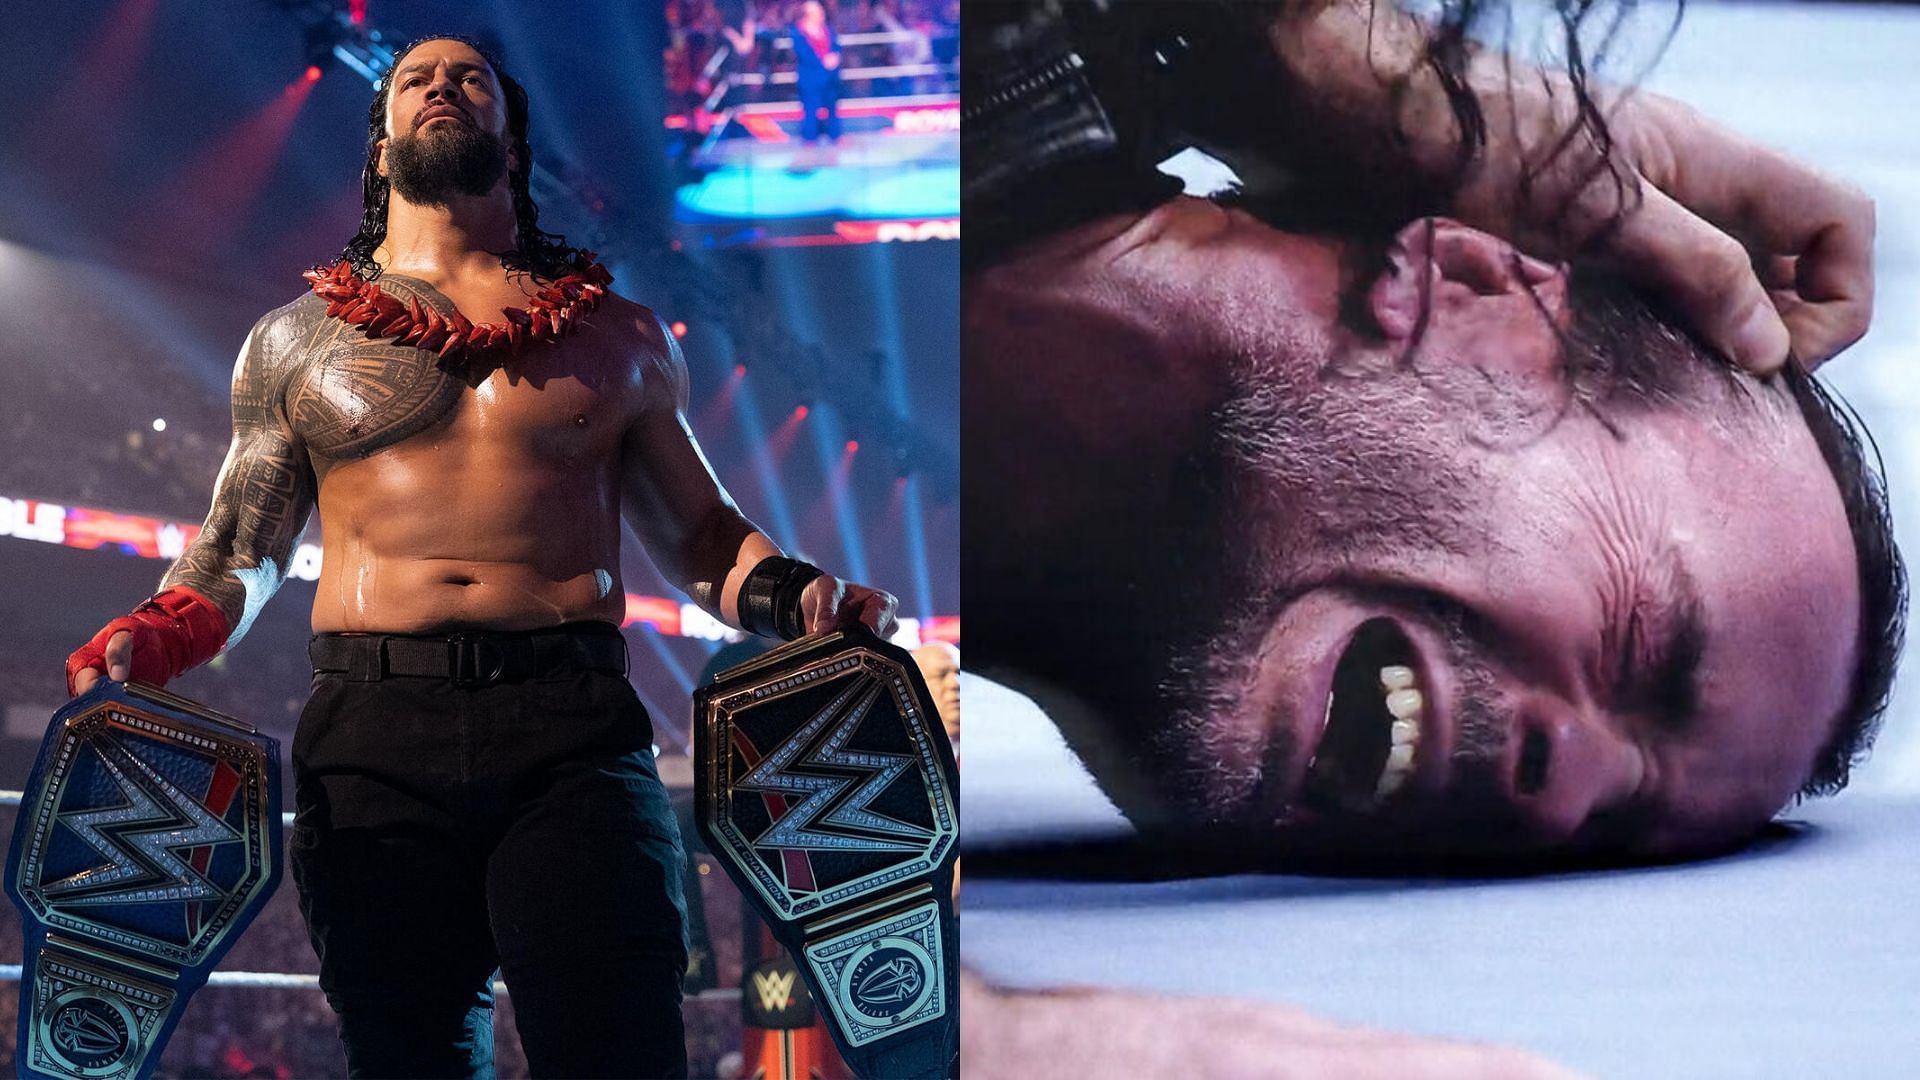 Roman Reigns and CM Punk have history during the former